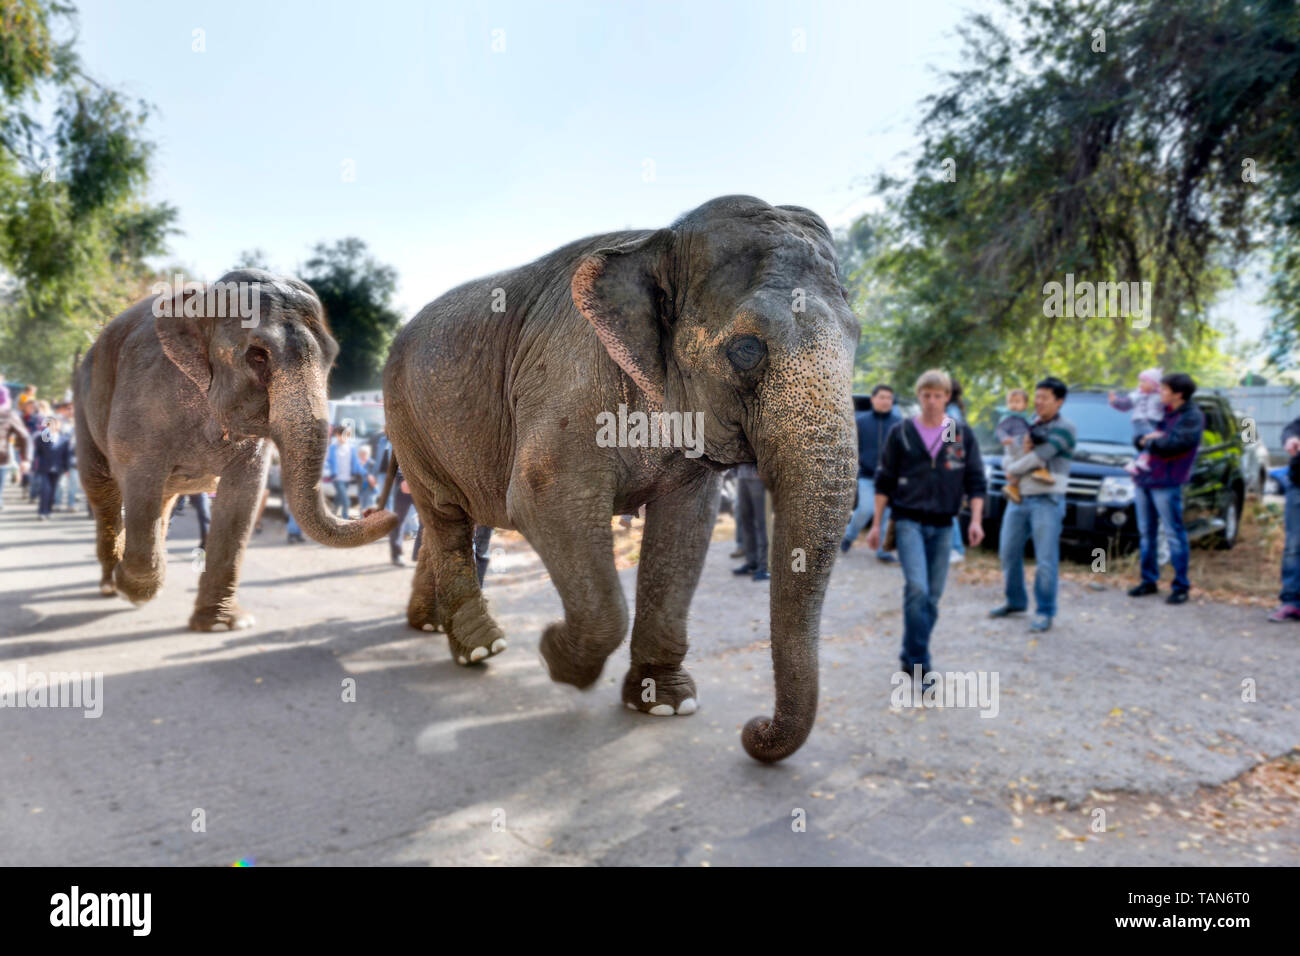 elephant, street, park, nature, travel, animal, road, wild, walking, young, wildlife, background, africa, adventure, tourism, african, people, family, Stock Photo